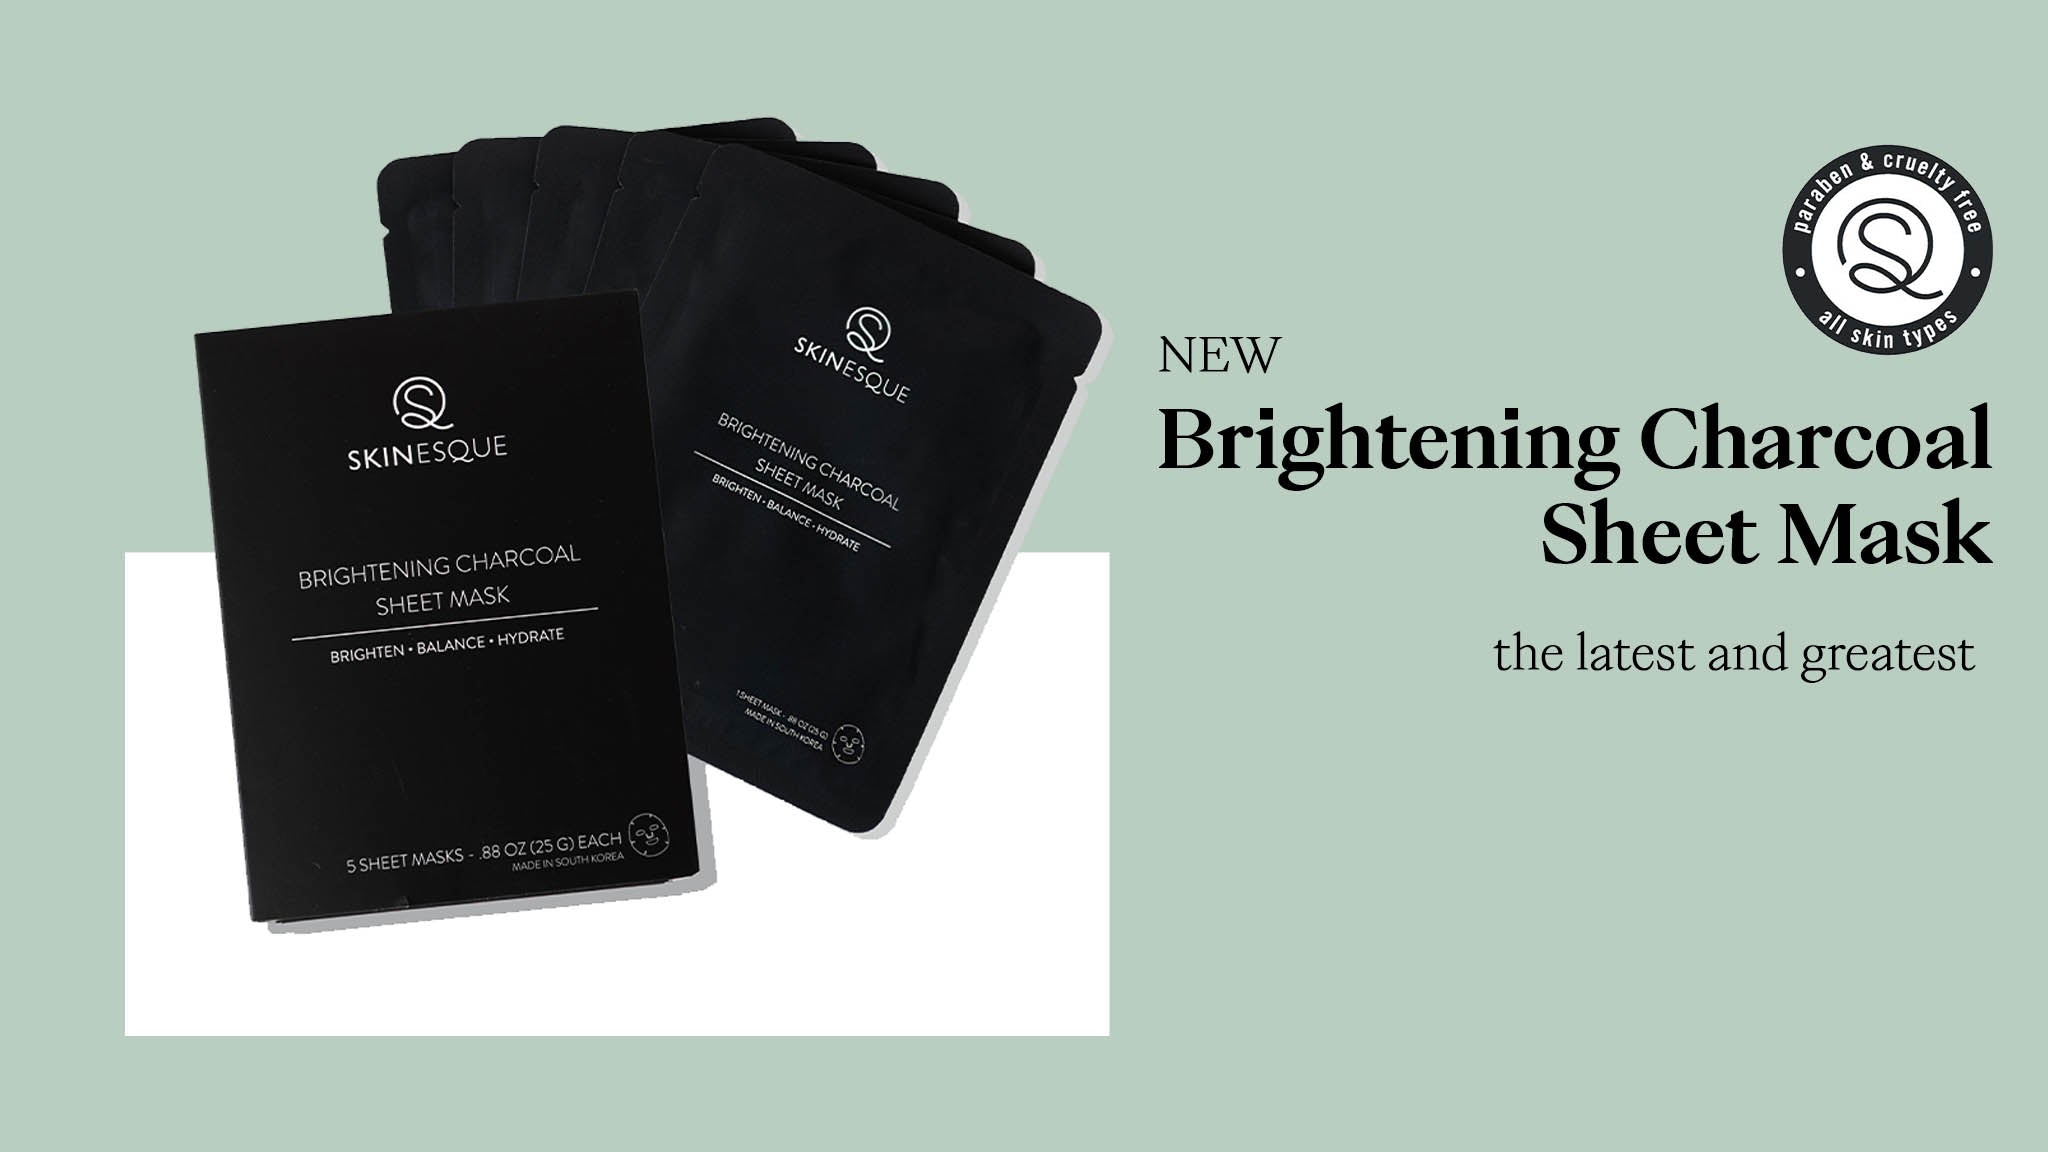 new and improved Brightening Charcoal Sheet Mask